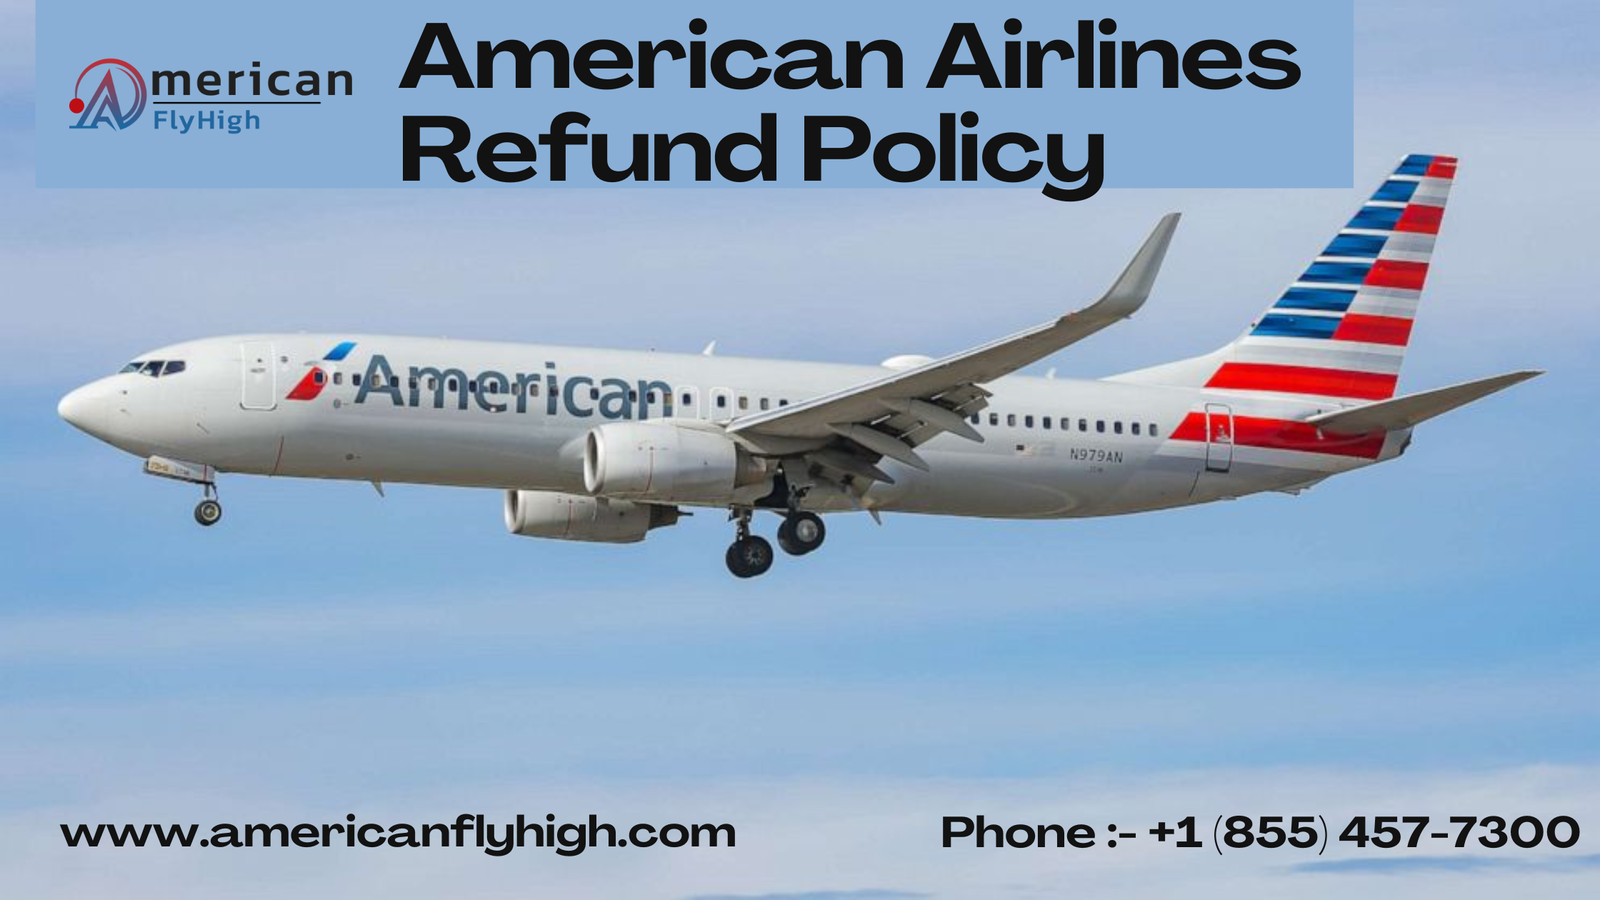 How Do I Get an American Airlines Refund?